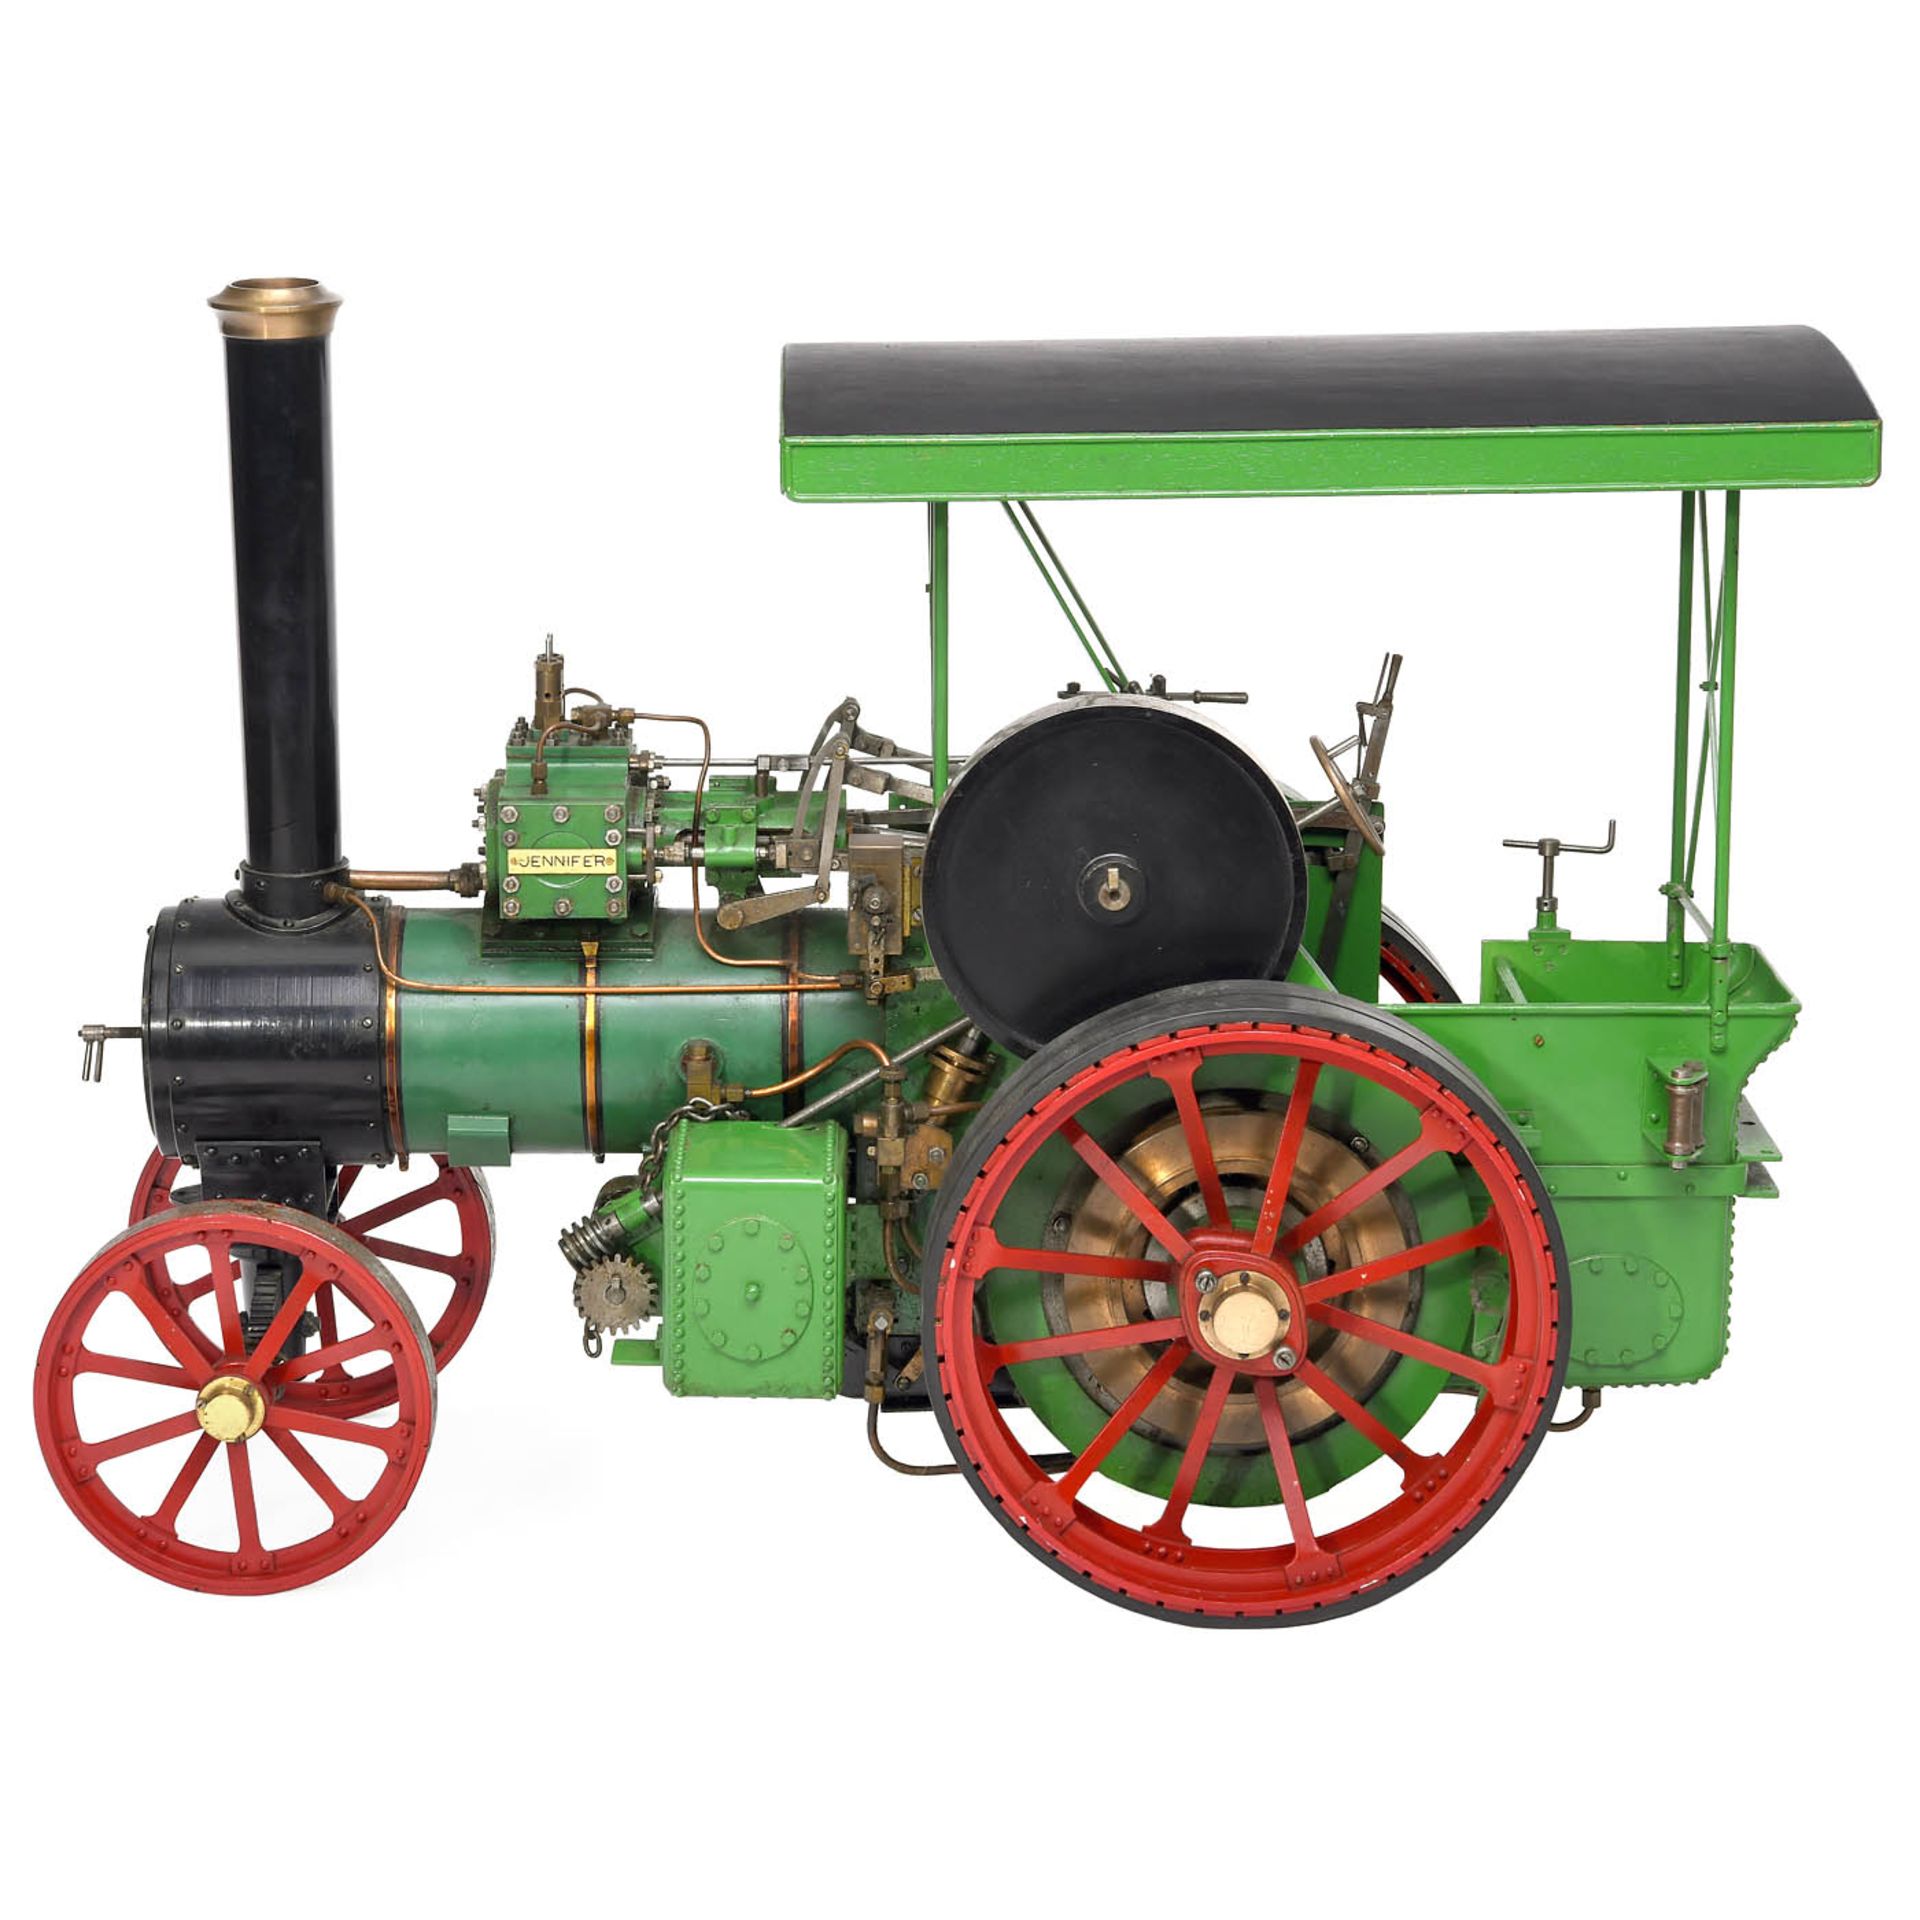 2-inch Scale Model of a Live-Steam Traction Engine "Jenifer", c. 1984 - Image 4 of 10